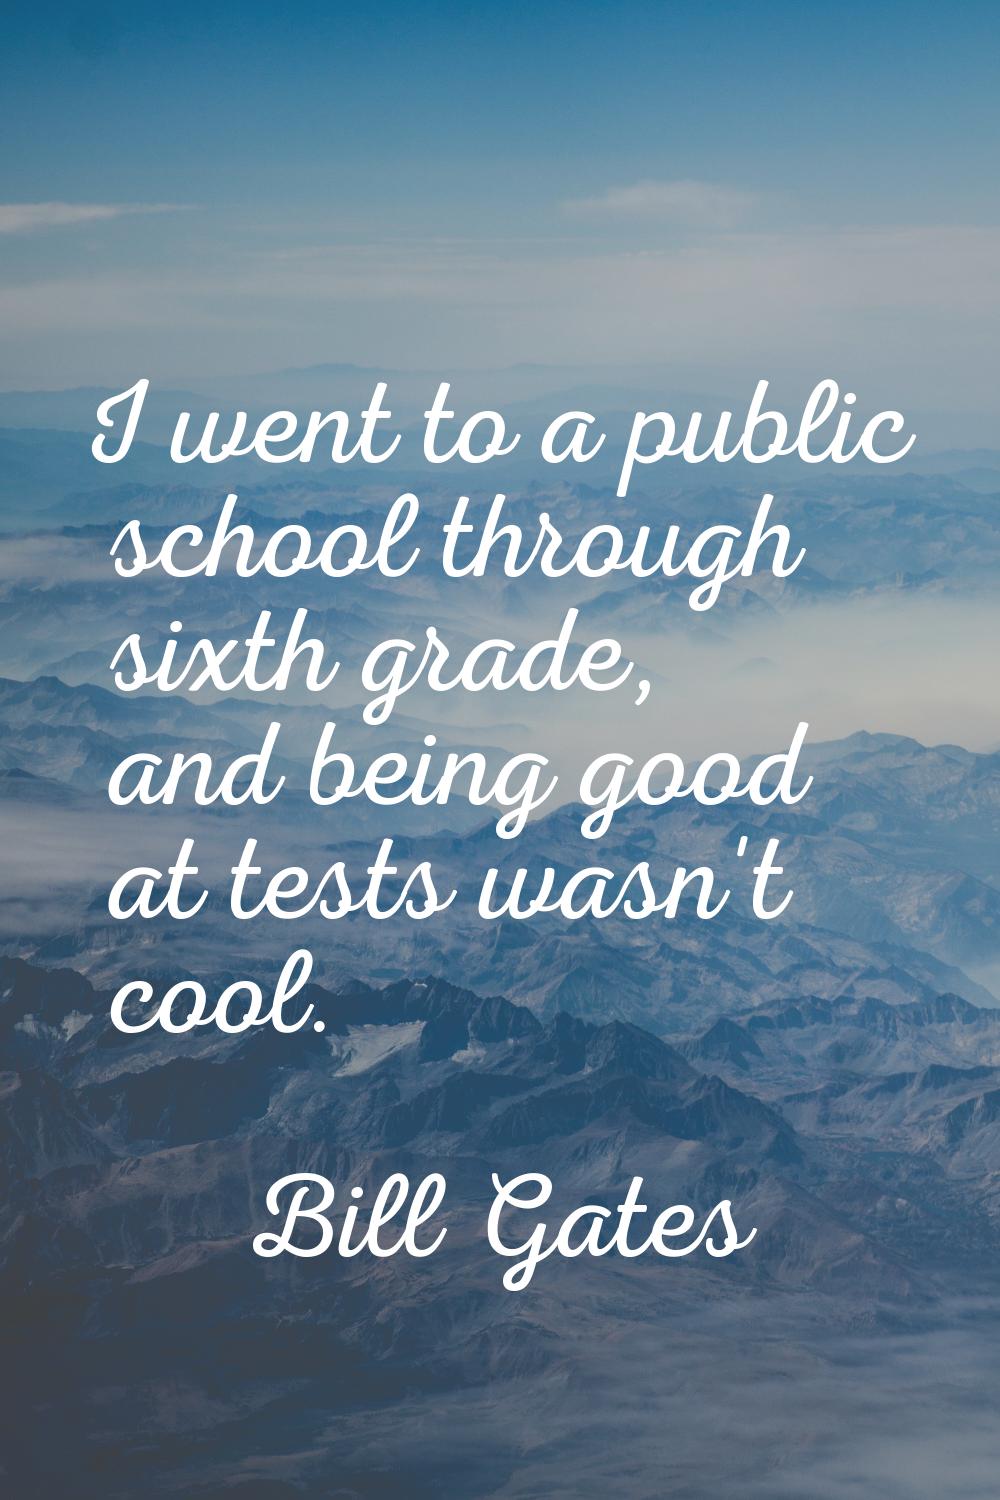 I went to a public school through sixth grade, and being good at tests wasn't cool.